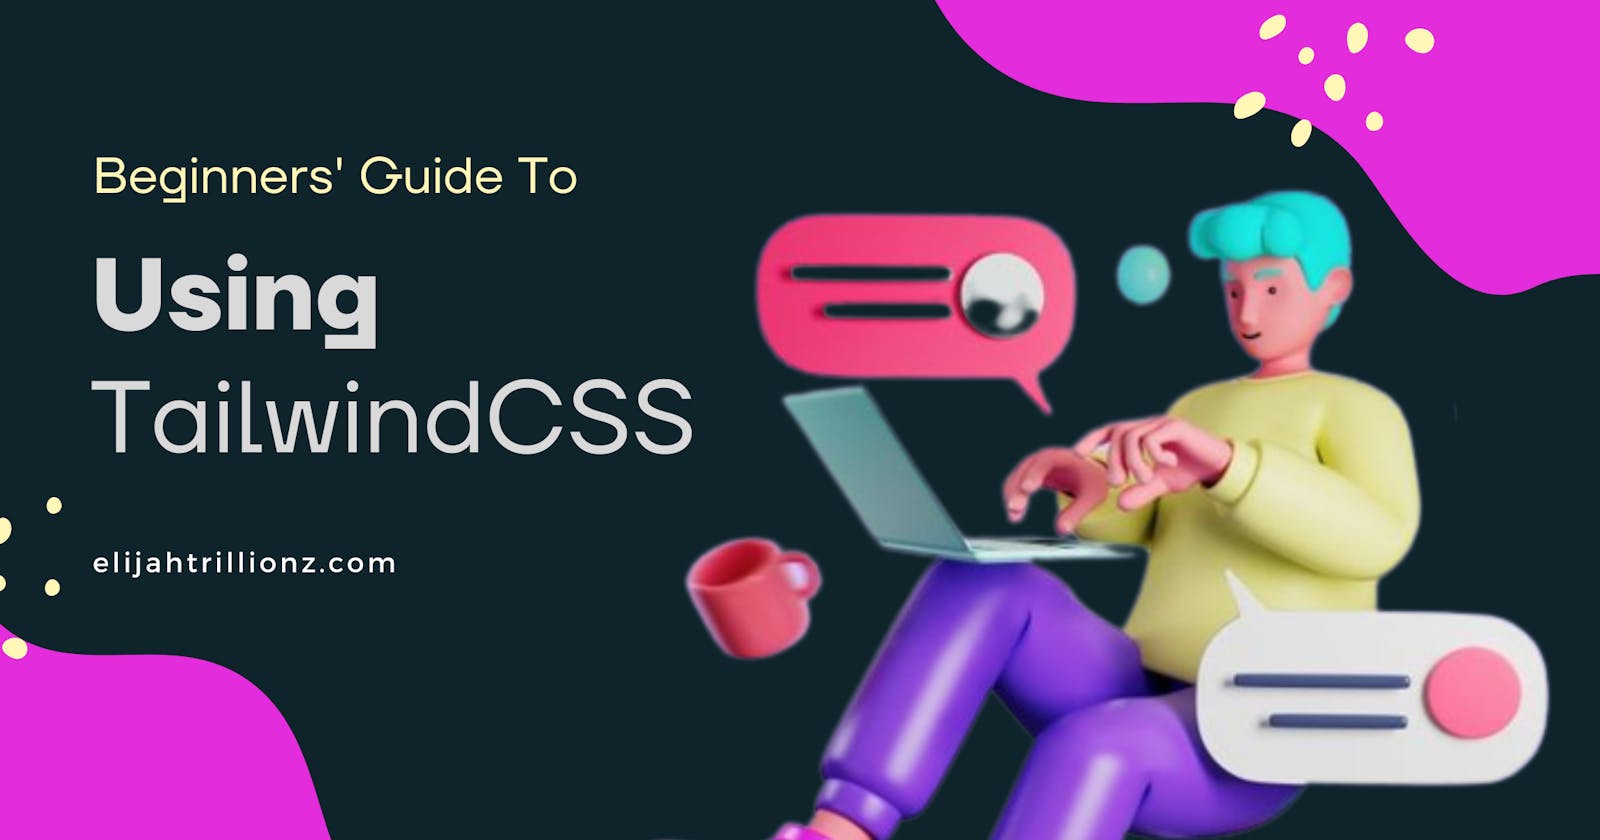 You Don't Need To Learn TailwindCSS To Use It